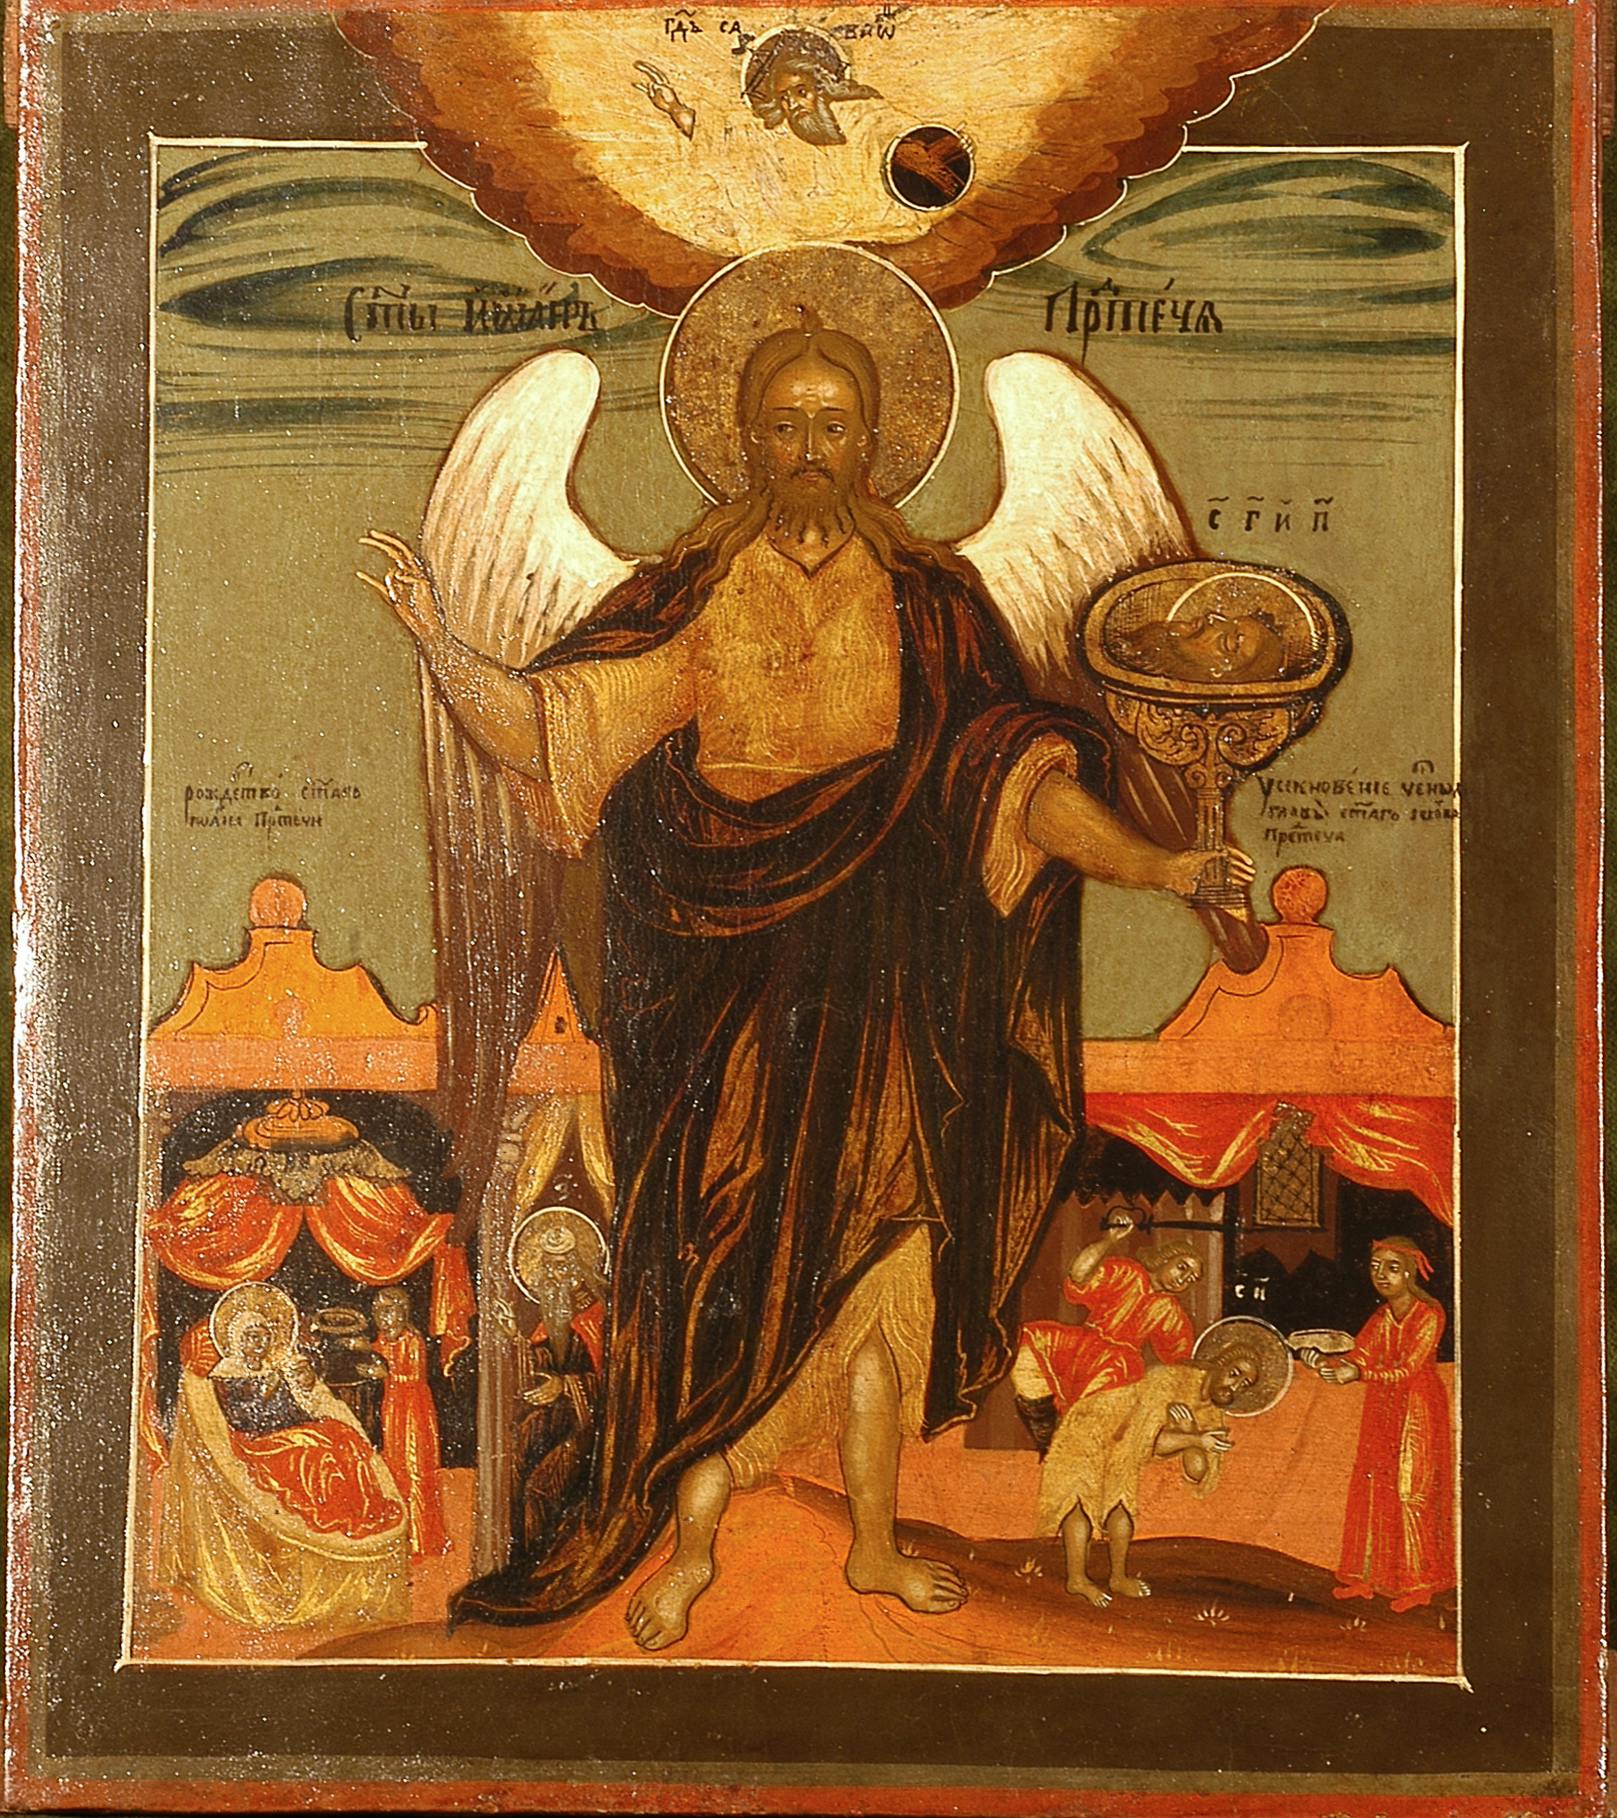 St. John the Baptist, Angel of the Desert, with scenes from the story of his life